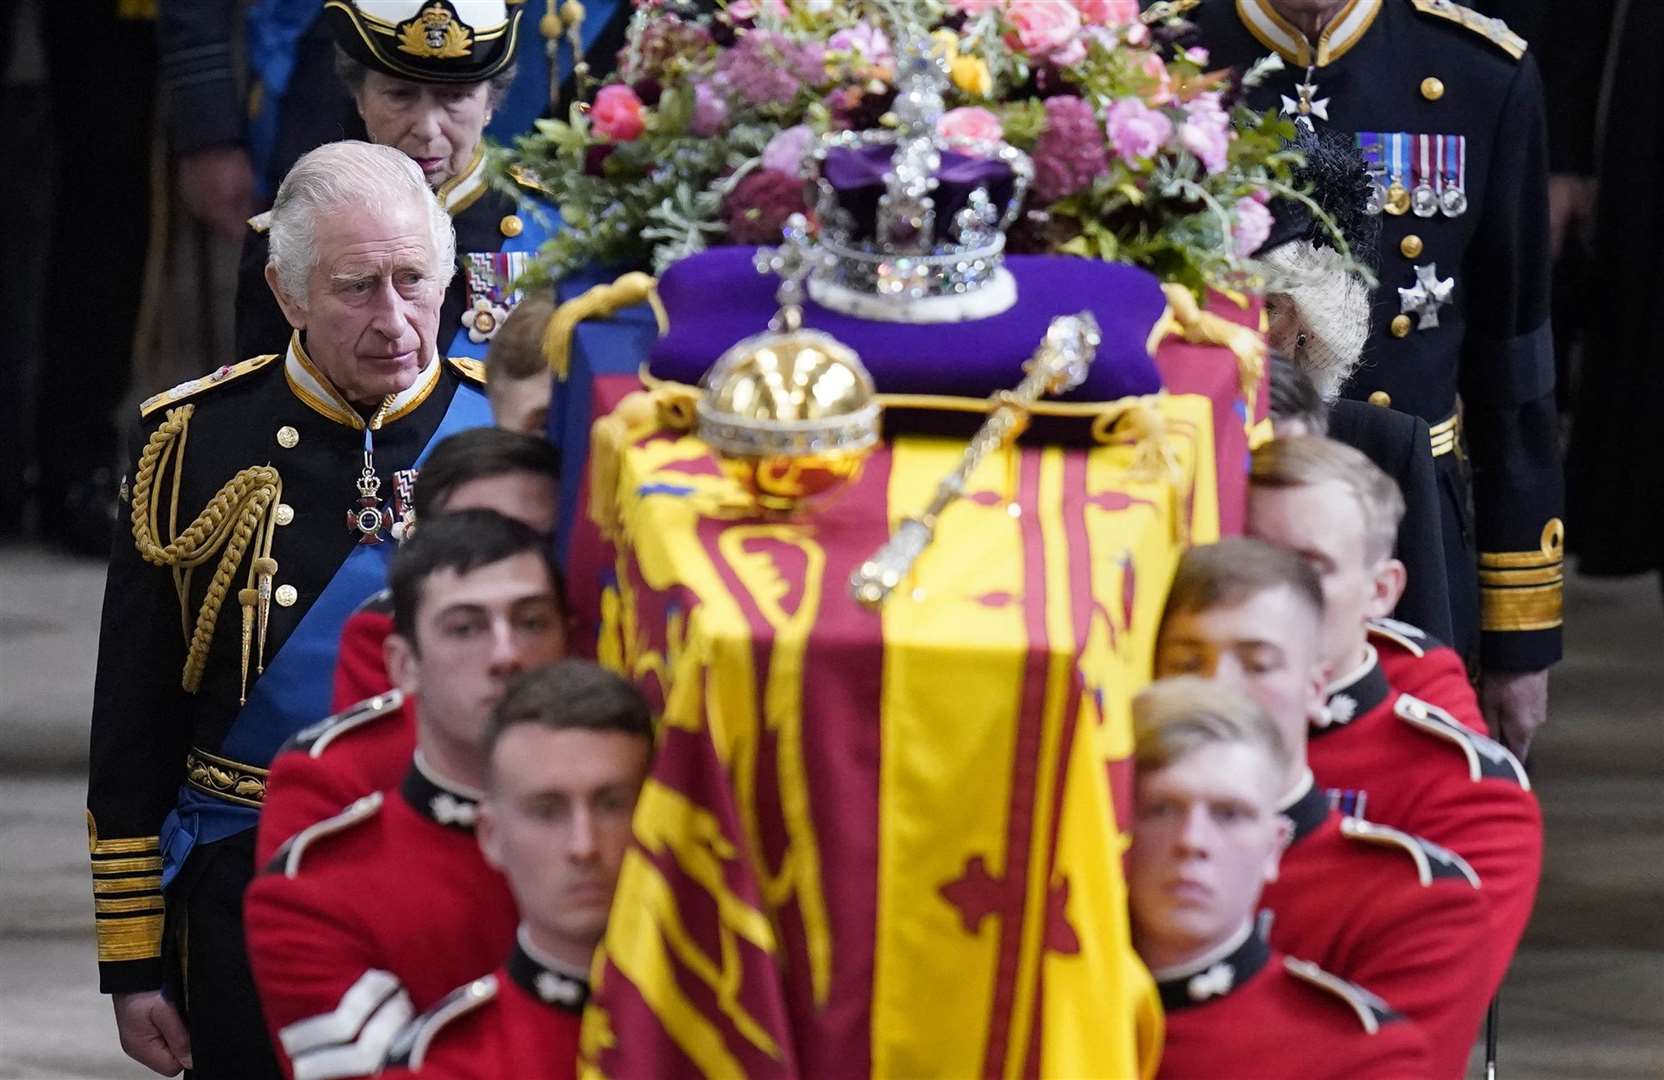 King Charles III has approved the new stamps which mark the life of Queen Elizabeth II, who was laid to rest last Monday. Image: PA.